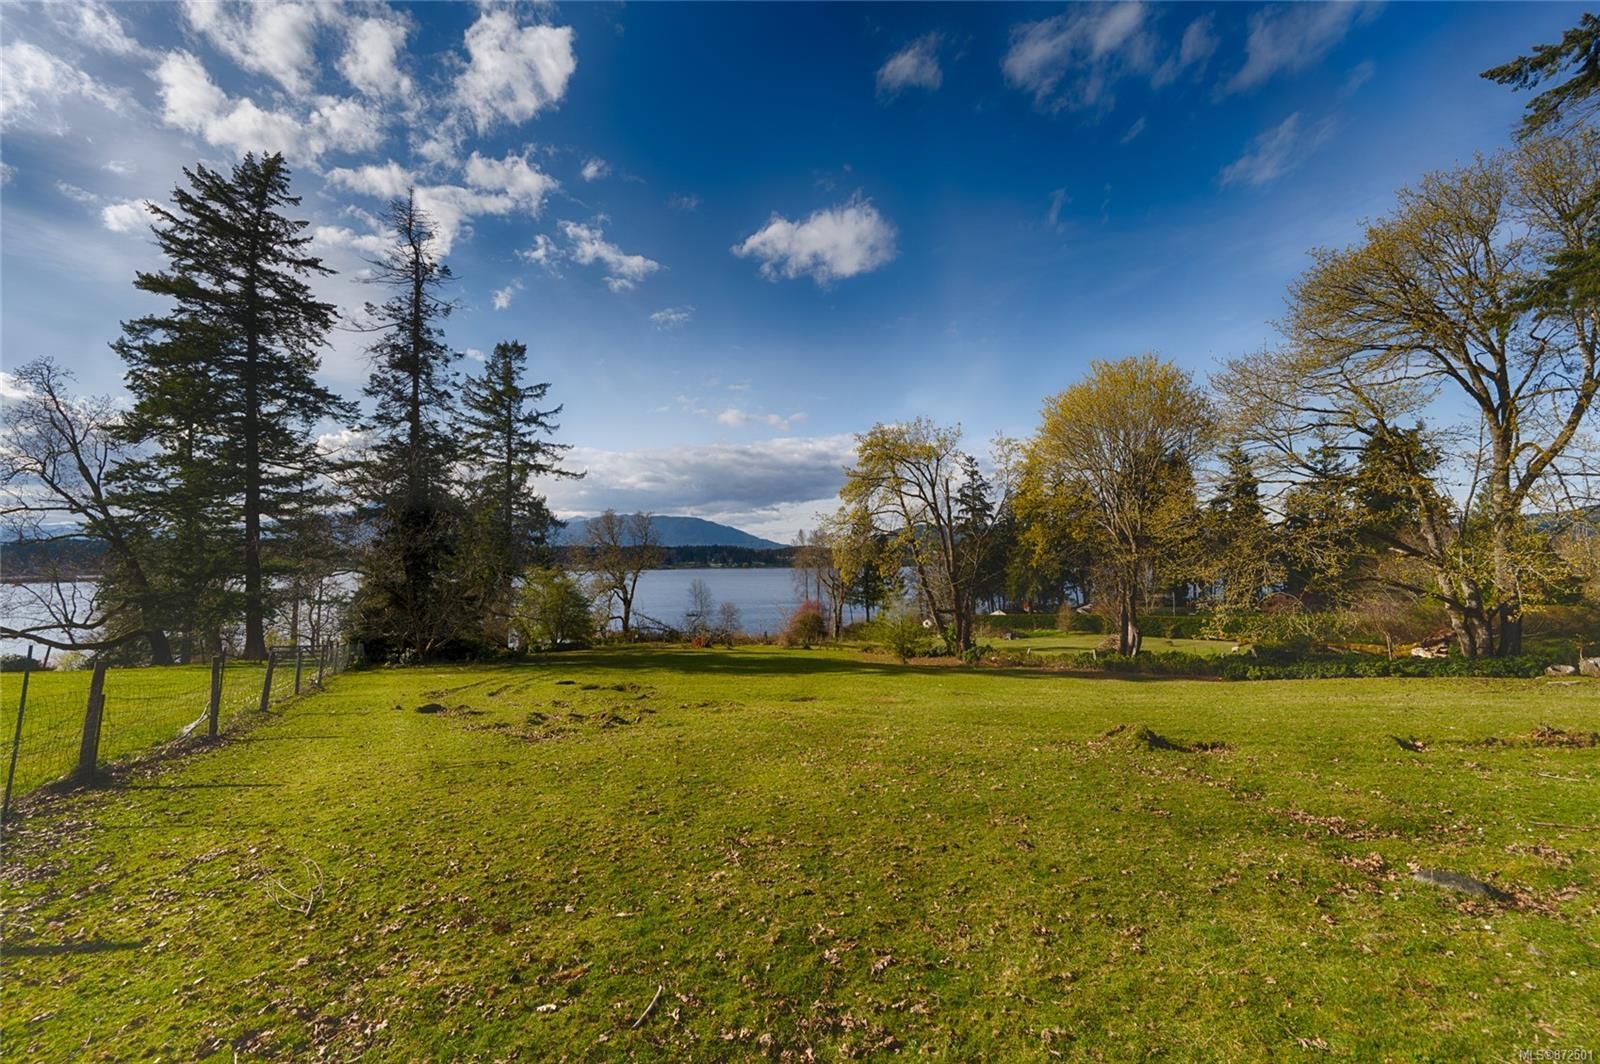 I have sold a property at 1743 Maple Bay Rd in Duncan
